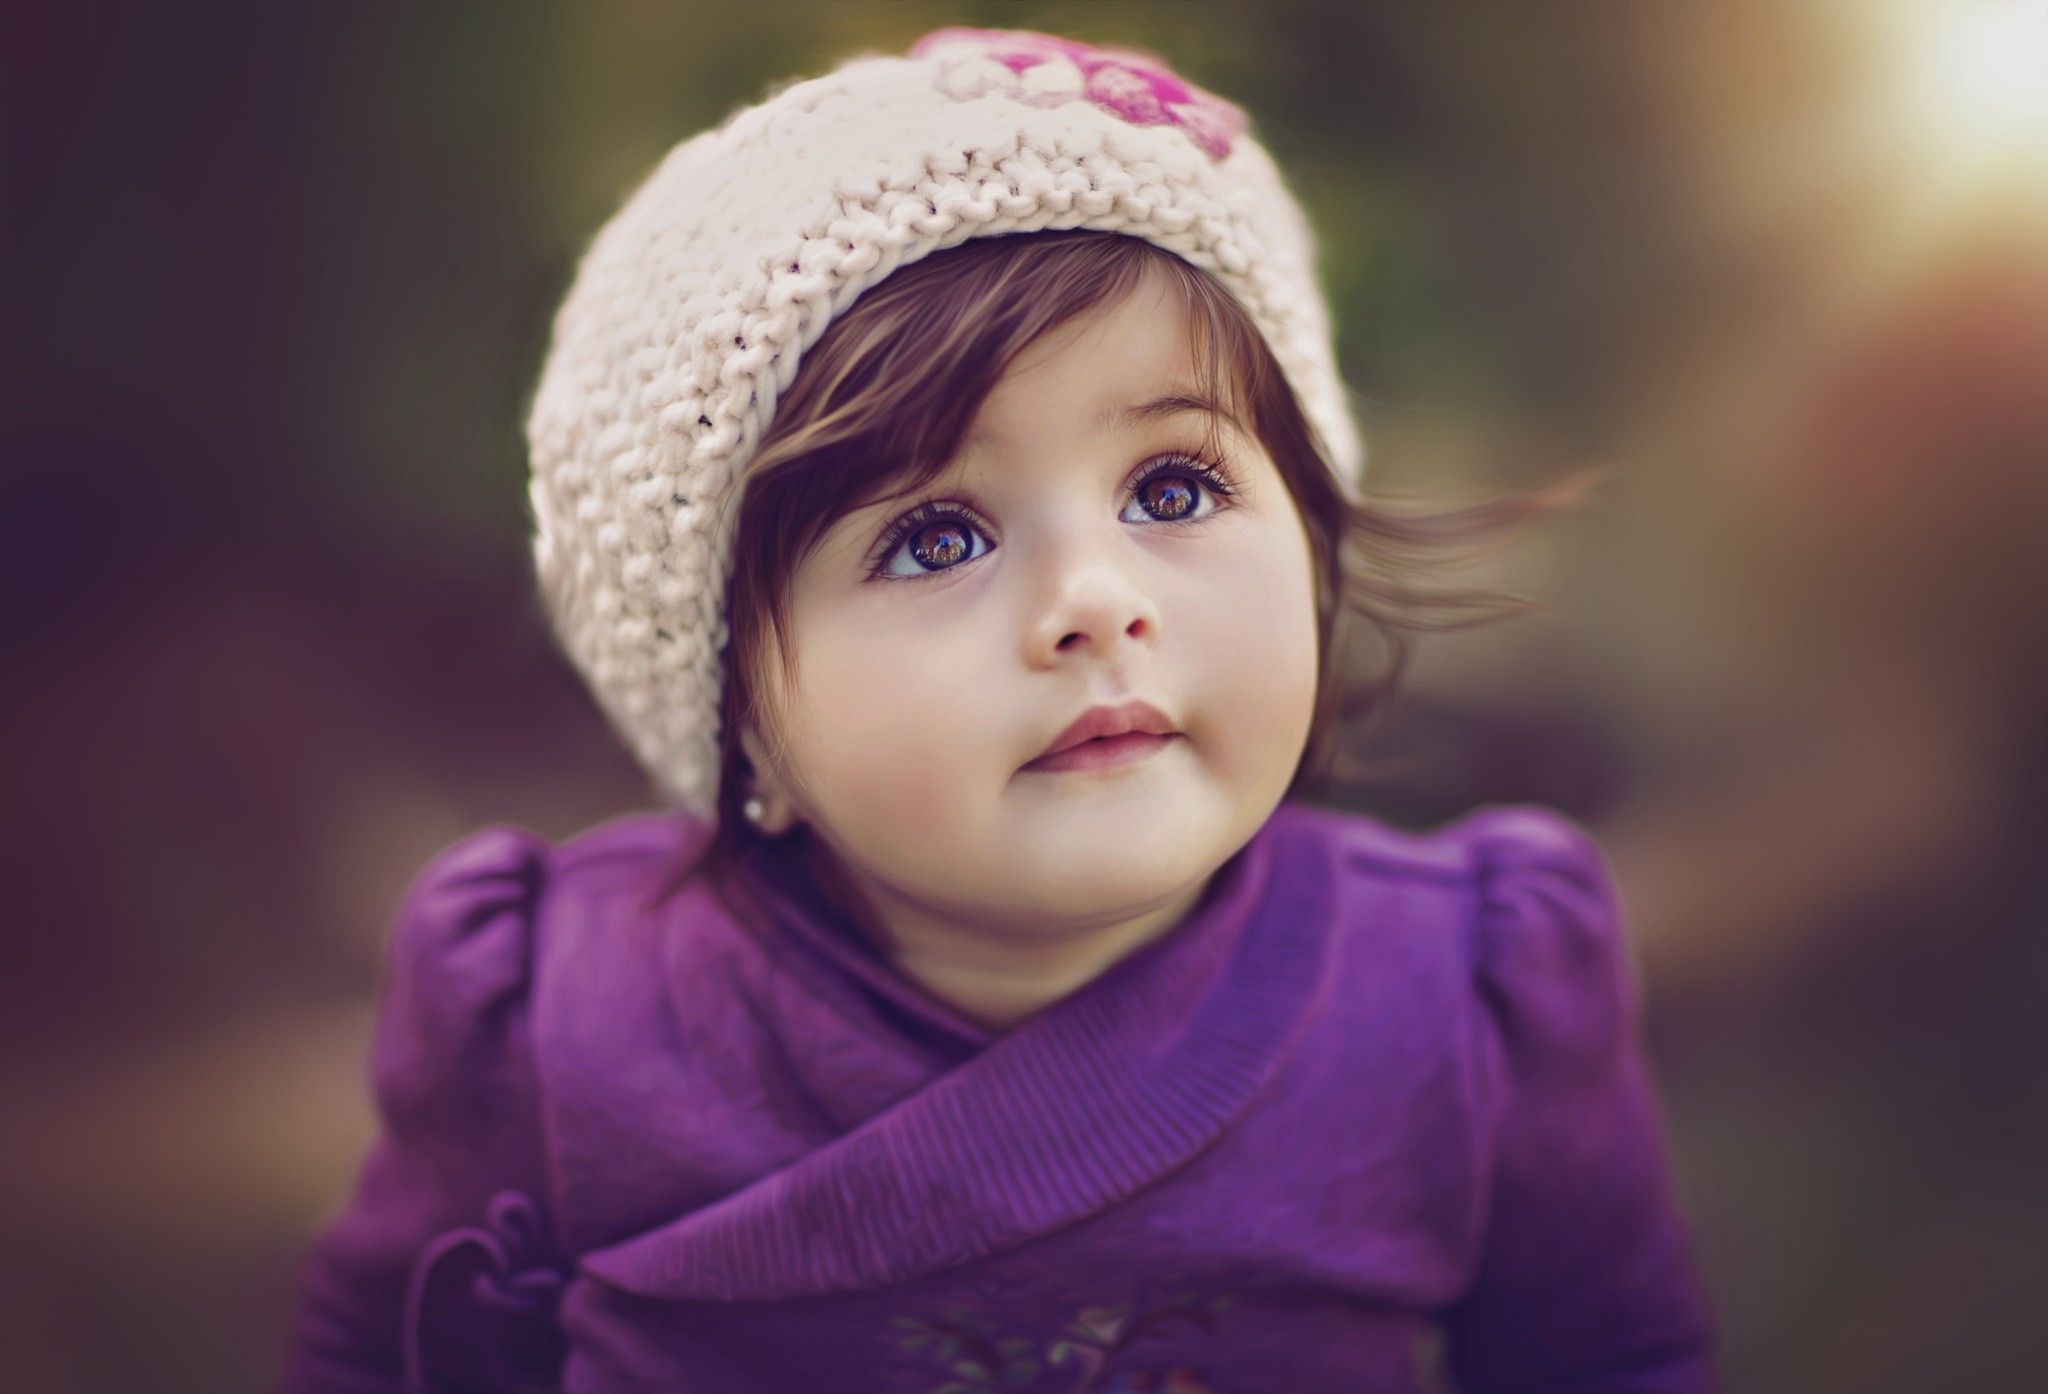 Cute Baby Girl Images Wallpapers